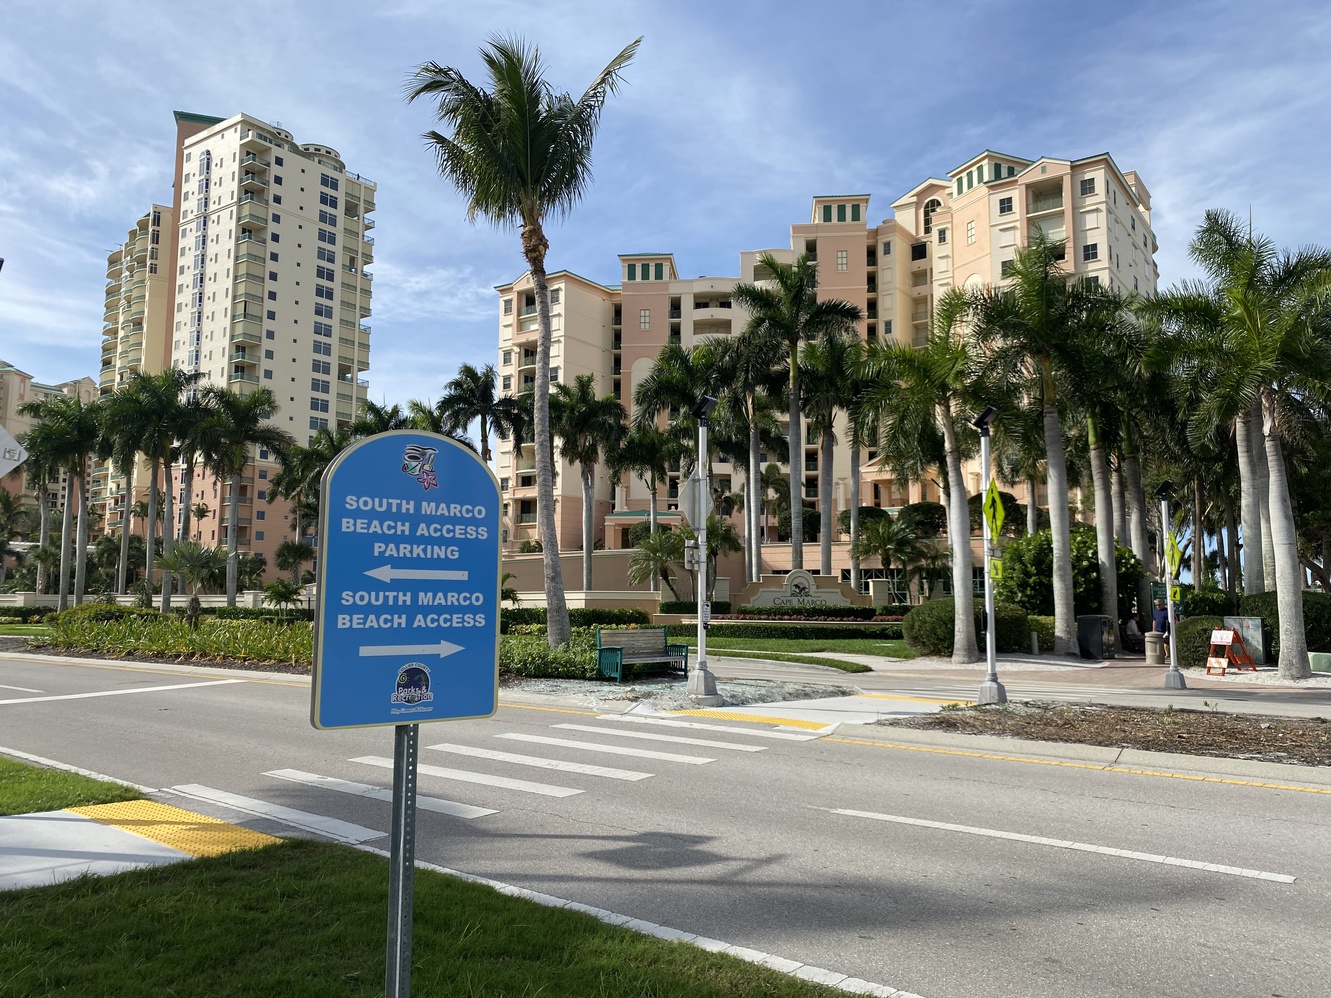 The walkway to South Marco Beach from Swallow Avenue is very
      pedestrian friendly.